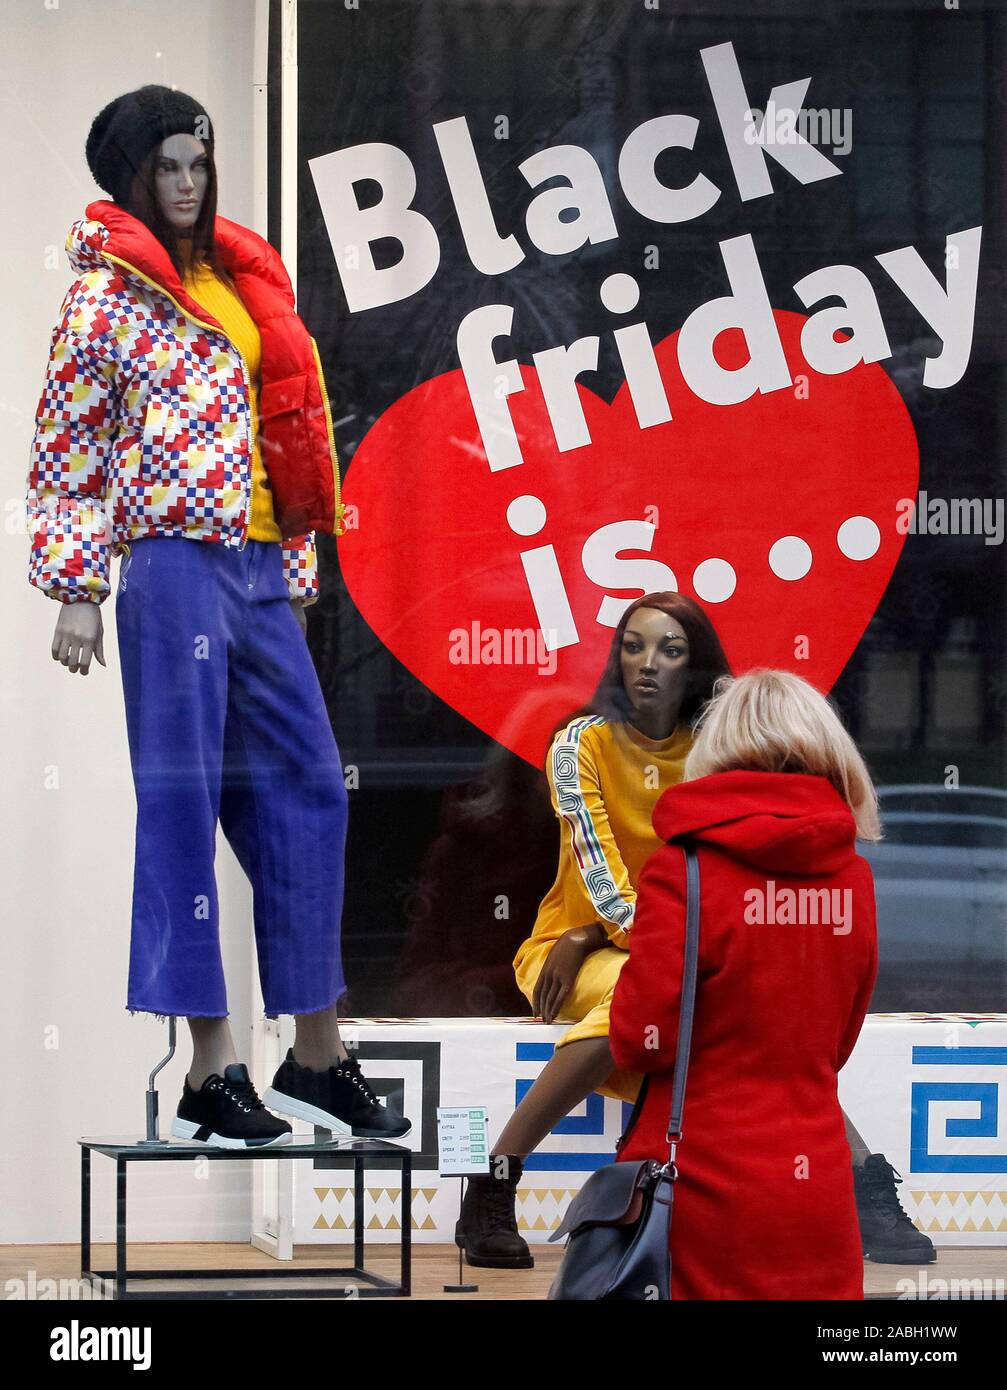 A woman looks at a board with Black Friday sales discounts, outside a store. Black Friday is an informal name for the Friday following Thanksgiving Day in the United States which is celebrated on the fourth Thursday of November. The Black Friday is a sales offer to attract shoppers for the Christmas shopping season. Stock Photo